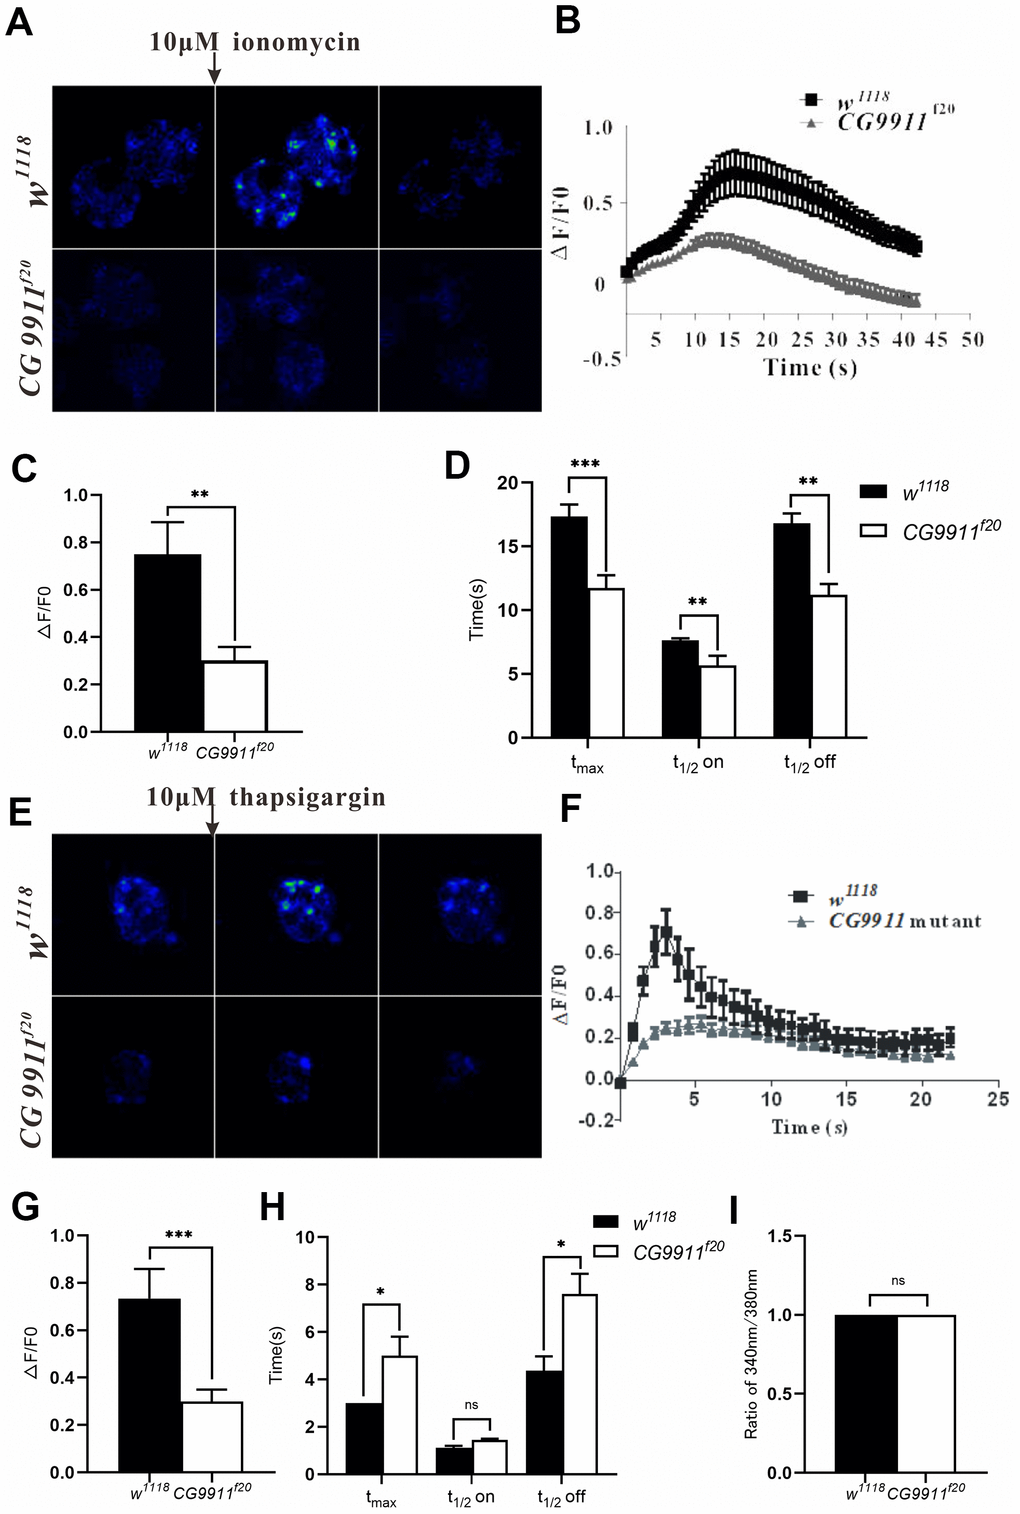 CG9911 modulates intracellular calcium homeostasis. (A) Fluorescence changes of w1118 and CG9911 mutant fat bodies which were treated with 10μM inomycin. Scale bar = 50 μm. (B) The dynamic changes of fluorescence intensity(ΔF/F0) in the signal fat cell of w1118 and CG9911 mutant files when stimulated with 10μM inomycin. (C) The difference of mean F/F0 between w1118 and CG9911 mutant fat cells when treated with 10μM inomycin. Data are presented as the means ± s.e.m; ** pD) The comparation of the mean data for time from basal to peak (tmax), half time raise (t1/2 on), and decay (t1/2 off) between w1118 and CG9911 mutant fat cells when treated with 10μM inomycin. Data are presented as the means ± s.e.m; ** pE) Ca2+ imaging of w1118 and CG9911 mutant fat bodies when treated with 10 μM TG. (F) The dynamic changes of fluorescence intensity(ΔF/F0) in the signal fat cell of w1118 and CG9911 mutant files when stimulated with 10μM TG. (G) The difference of mean data of F/F0 between w1118 and CG9911 mutant fat bodies when treated with 10 μM TG. Data are presented as the means ± s.e.m; *** pH) The comparation of the mean data for time from basal to peak (tmax), half time raise (t1/2 on), and decay (t1/2 off) between w1118 and CG9911 mutant fat cells when treated with 10μM TG. Data are presented as the means ± s.e.m; *pI) The quiescent Ca2+ level in the signal fat cell of w1118 and CG9911 mutant files.